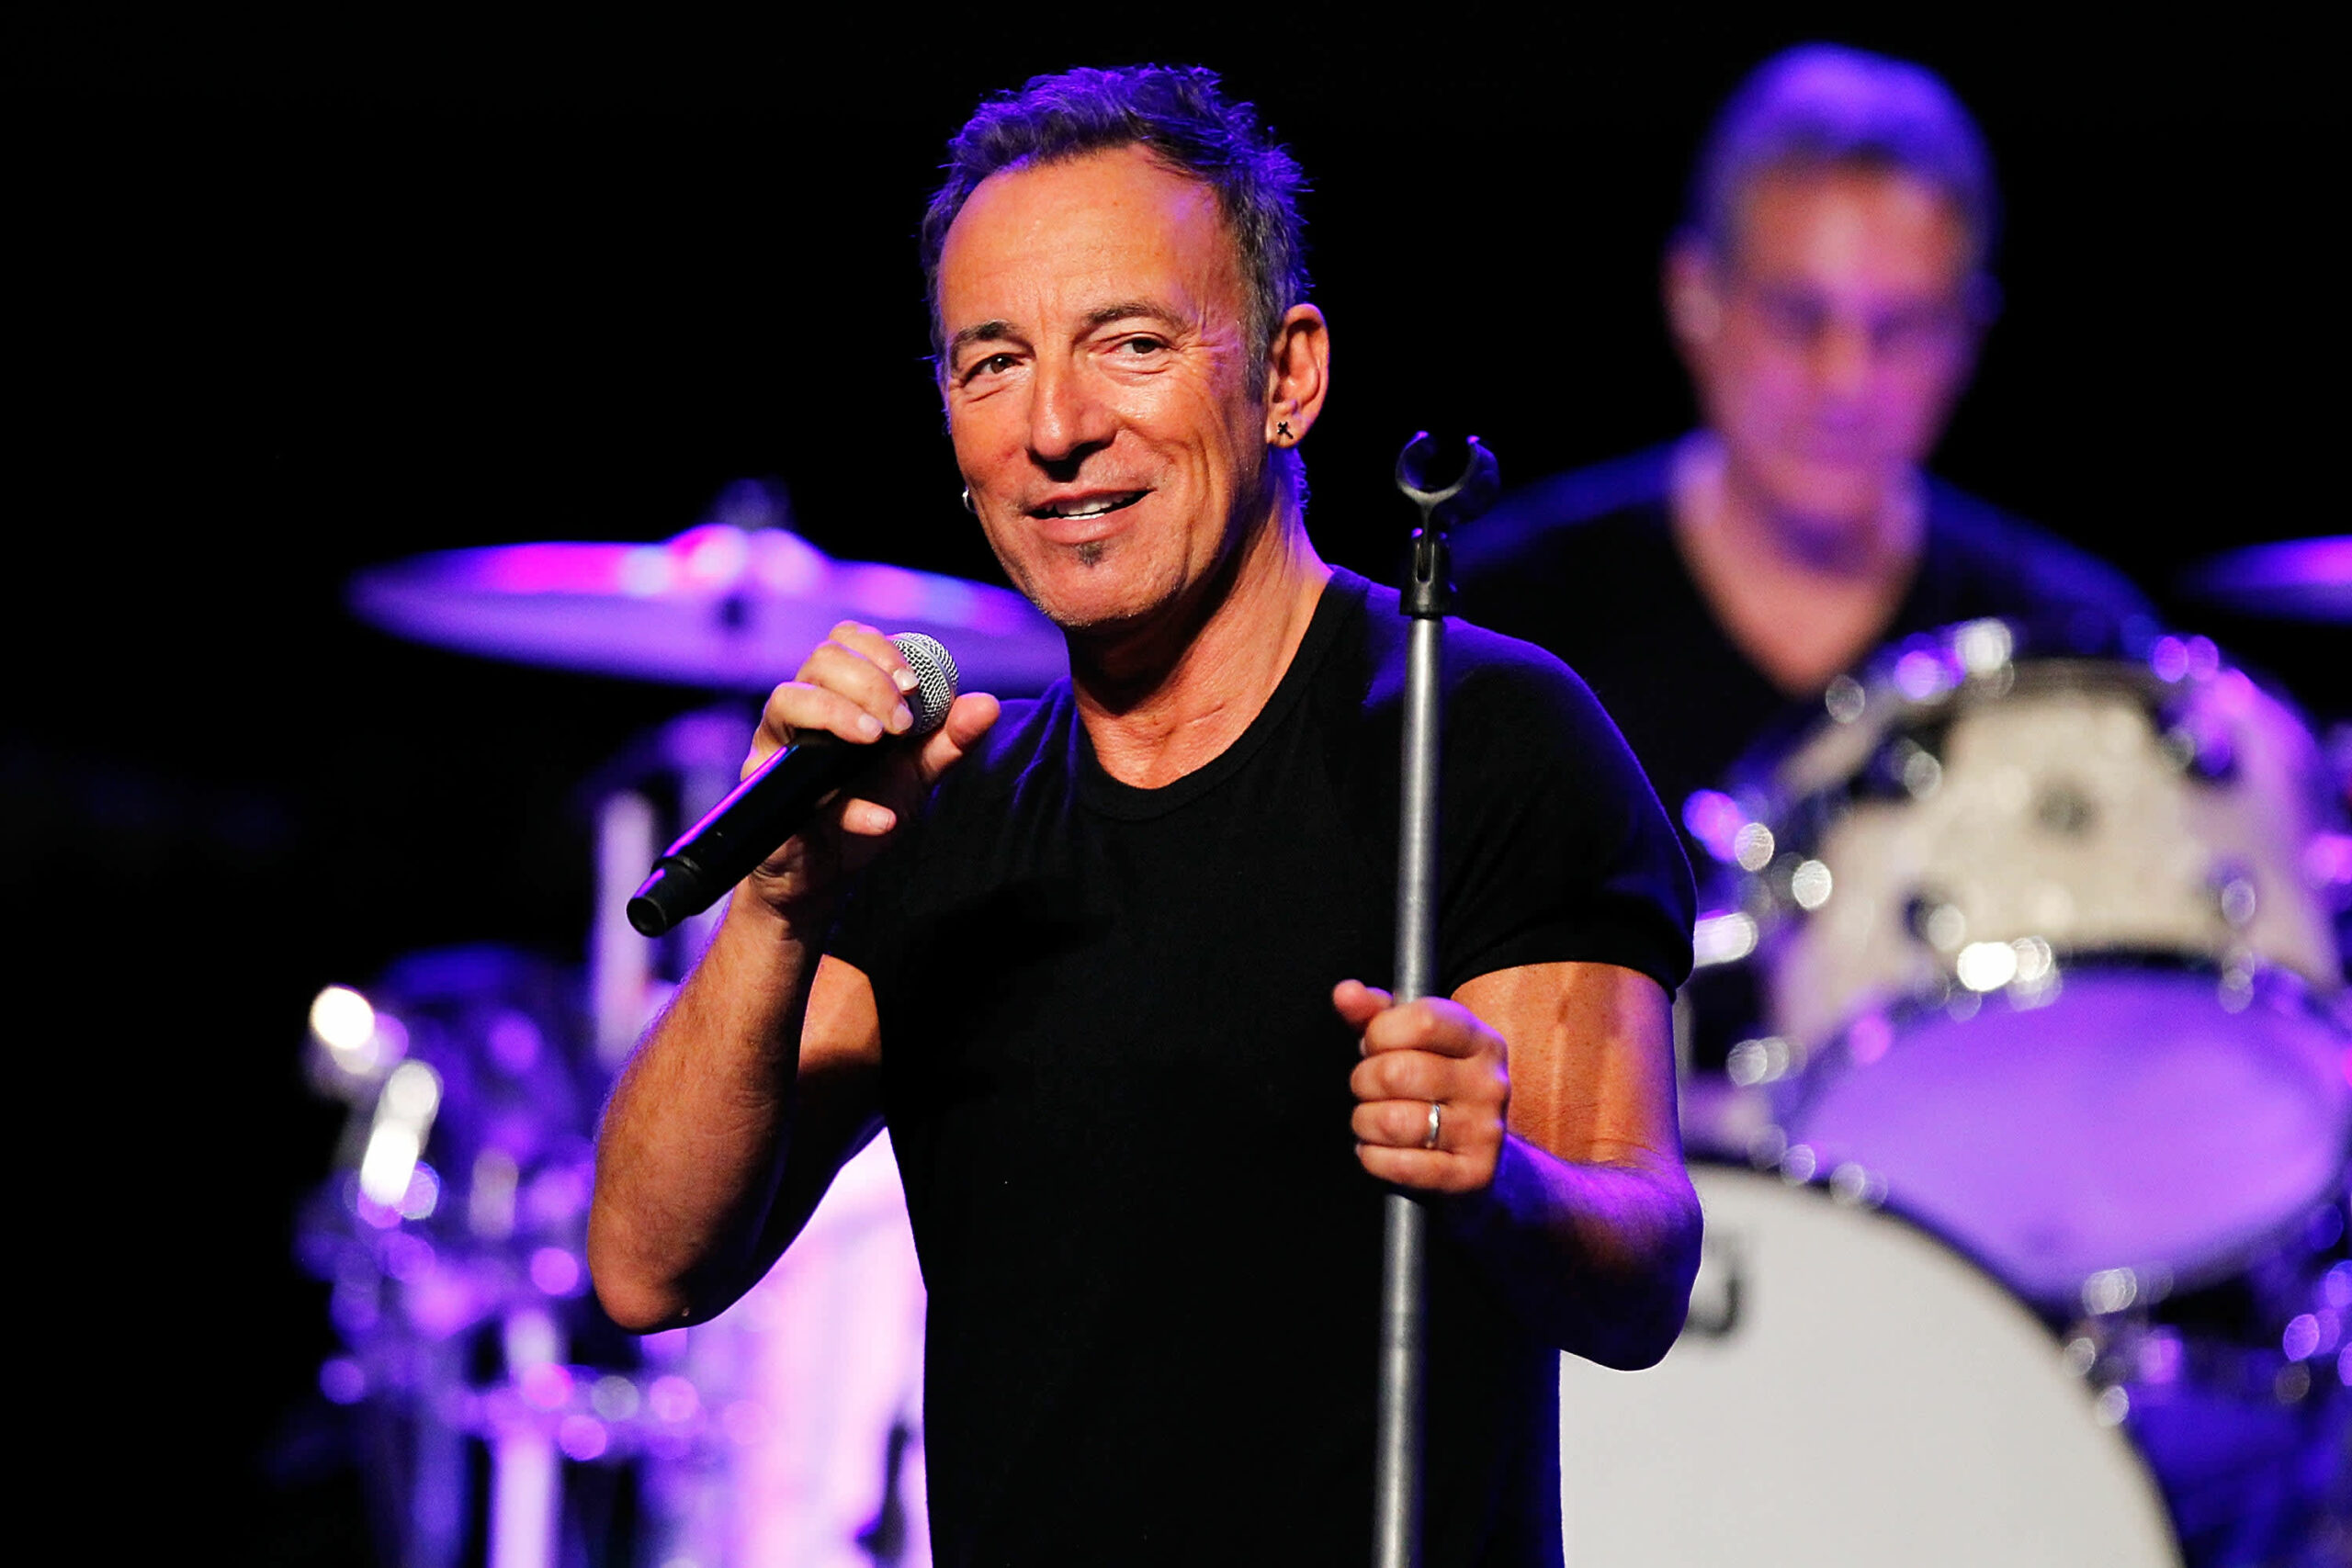 Bruce Springsteen is selling his music catalog in massive deal: report